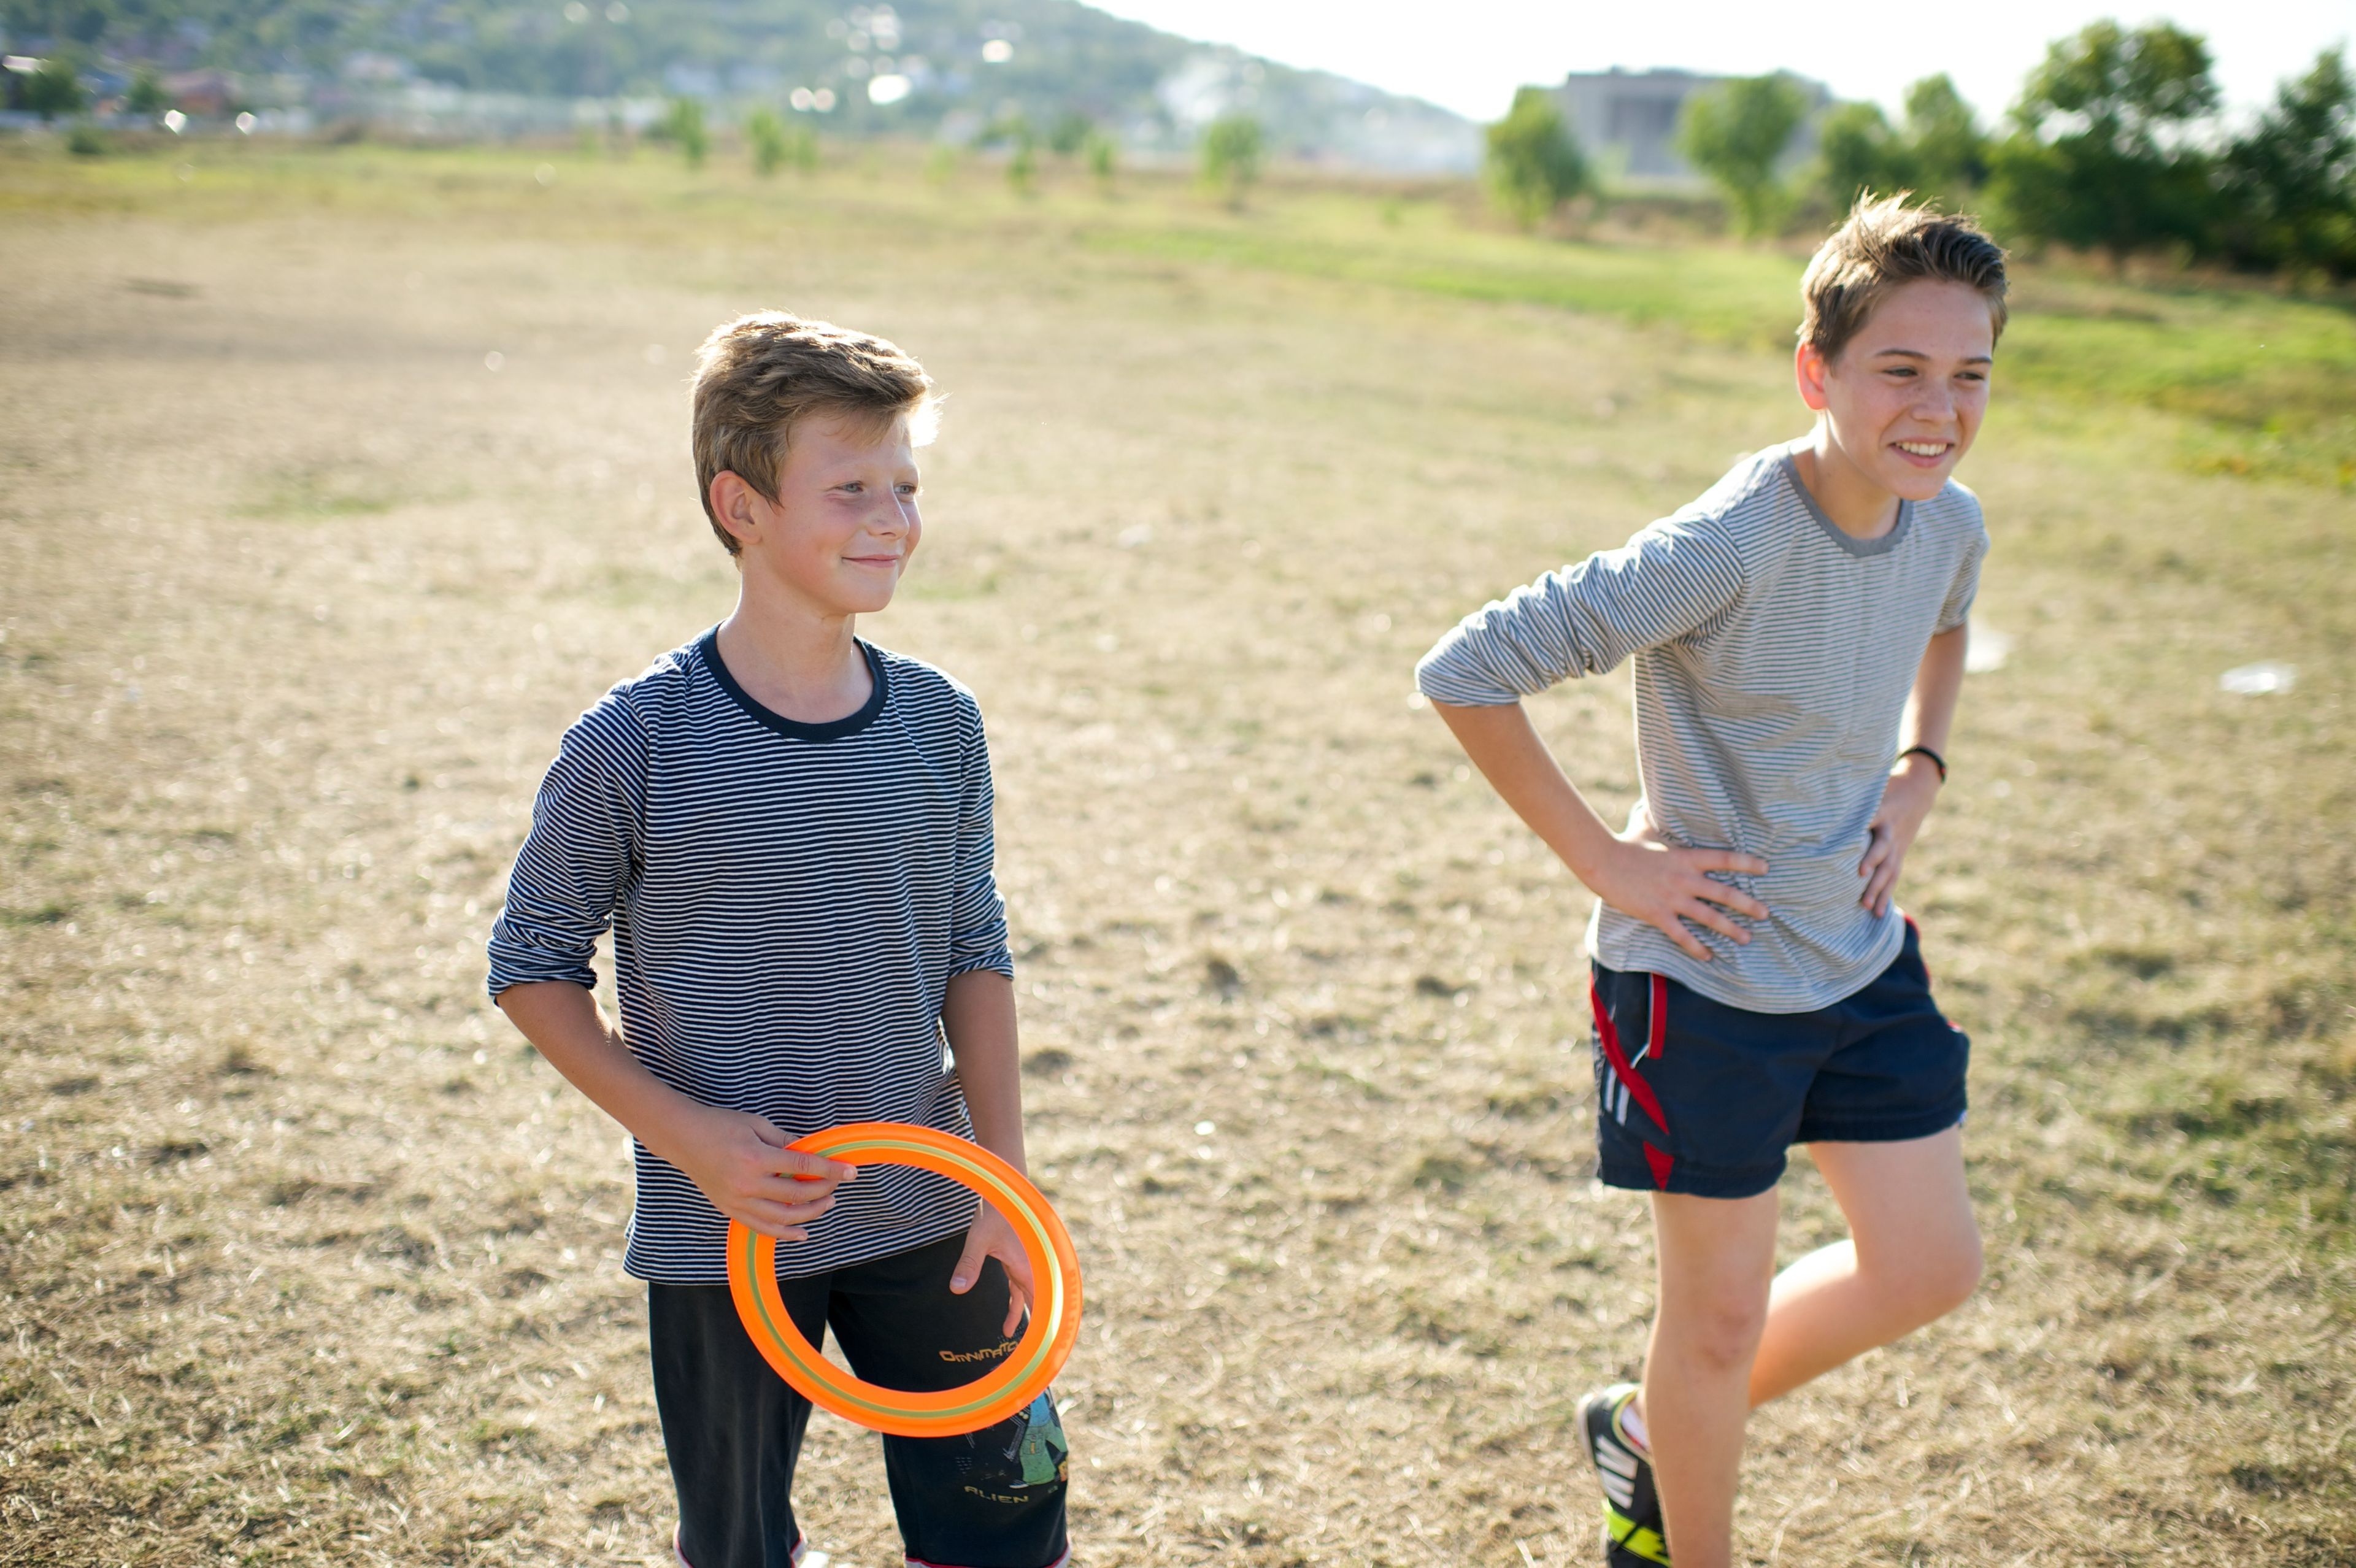 A young man stands holding a Frisbee next to another boy.